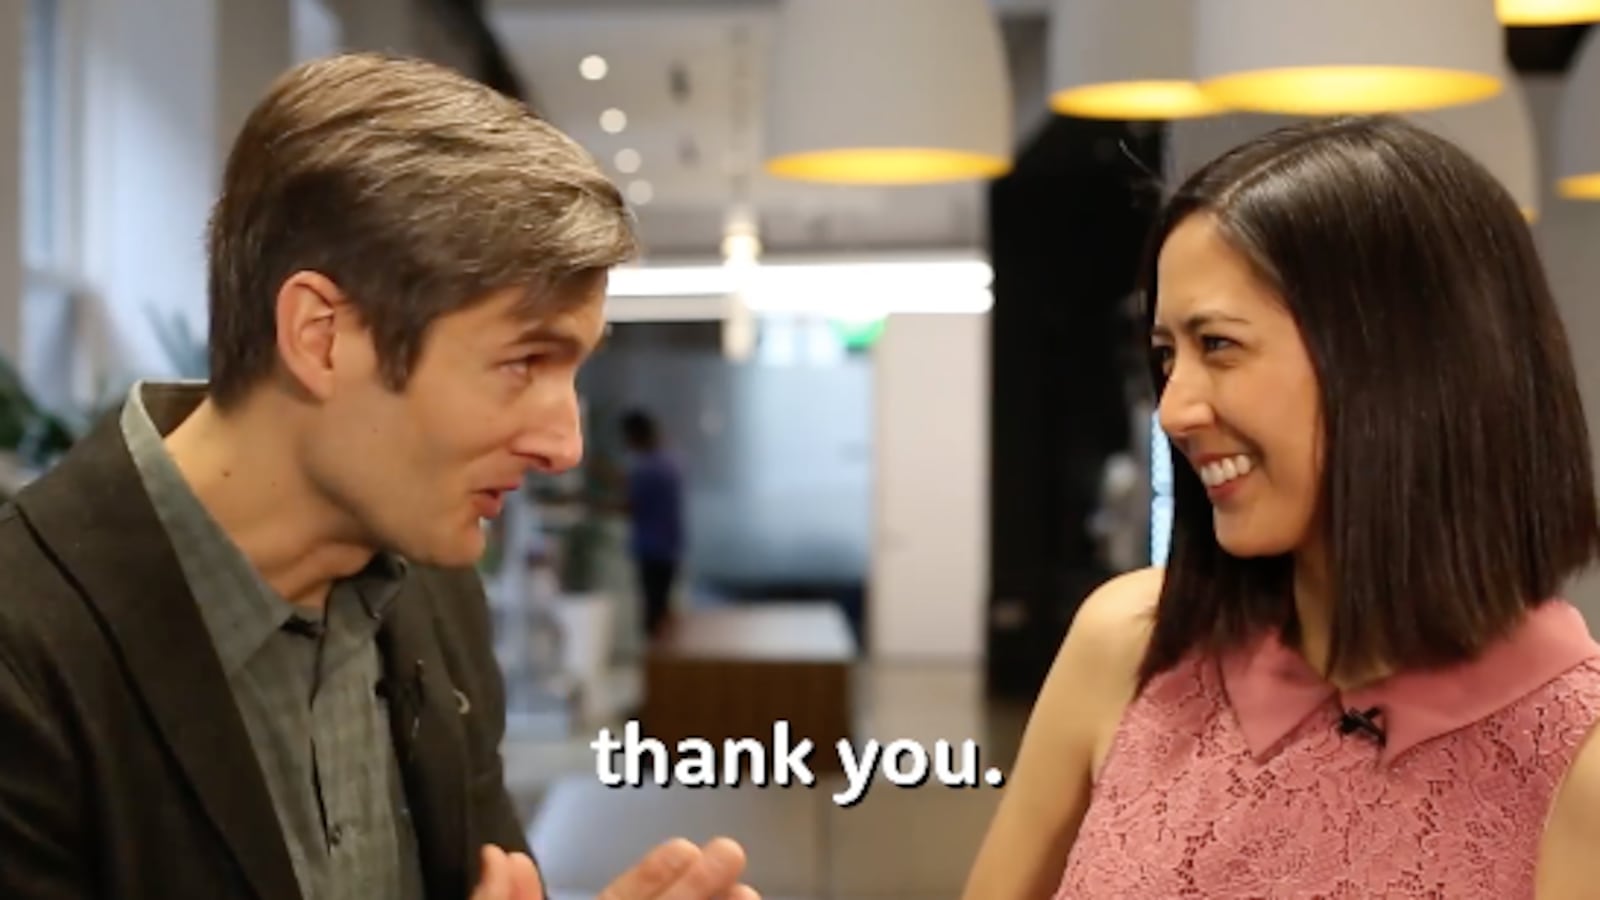 DonorsChoose founder Charles Best thanked Ripple's Monica Long in a video announcing the cryptocurrency company's donation.